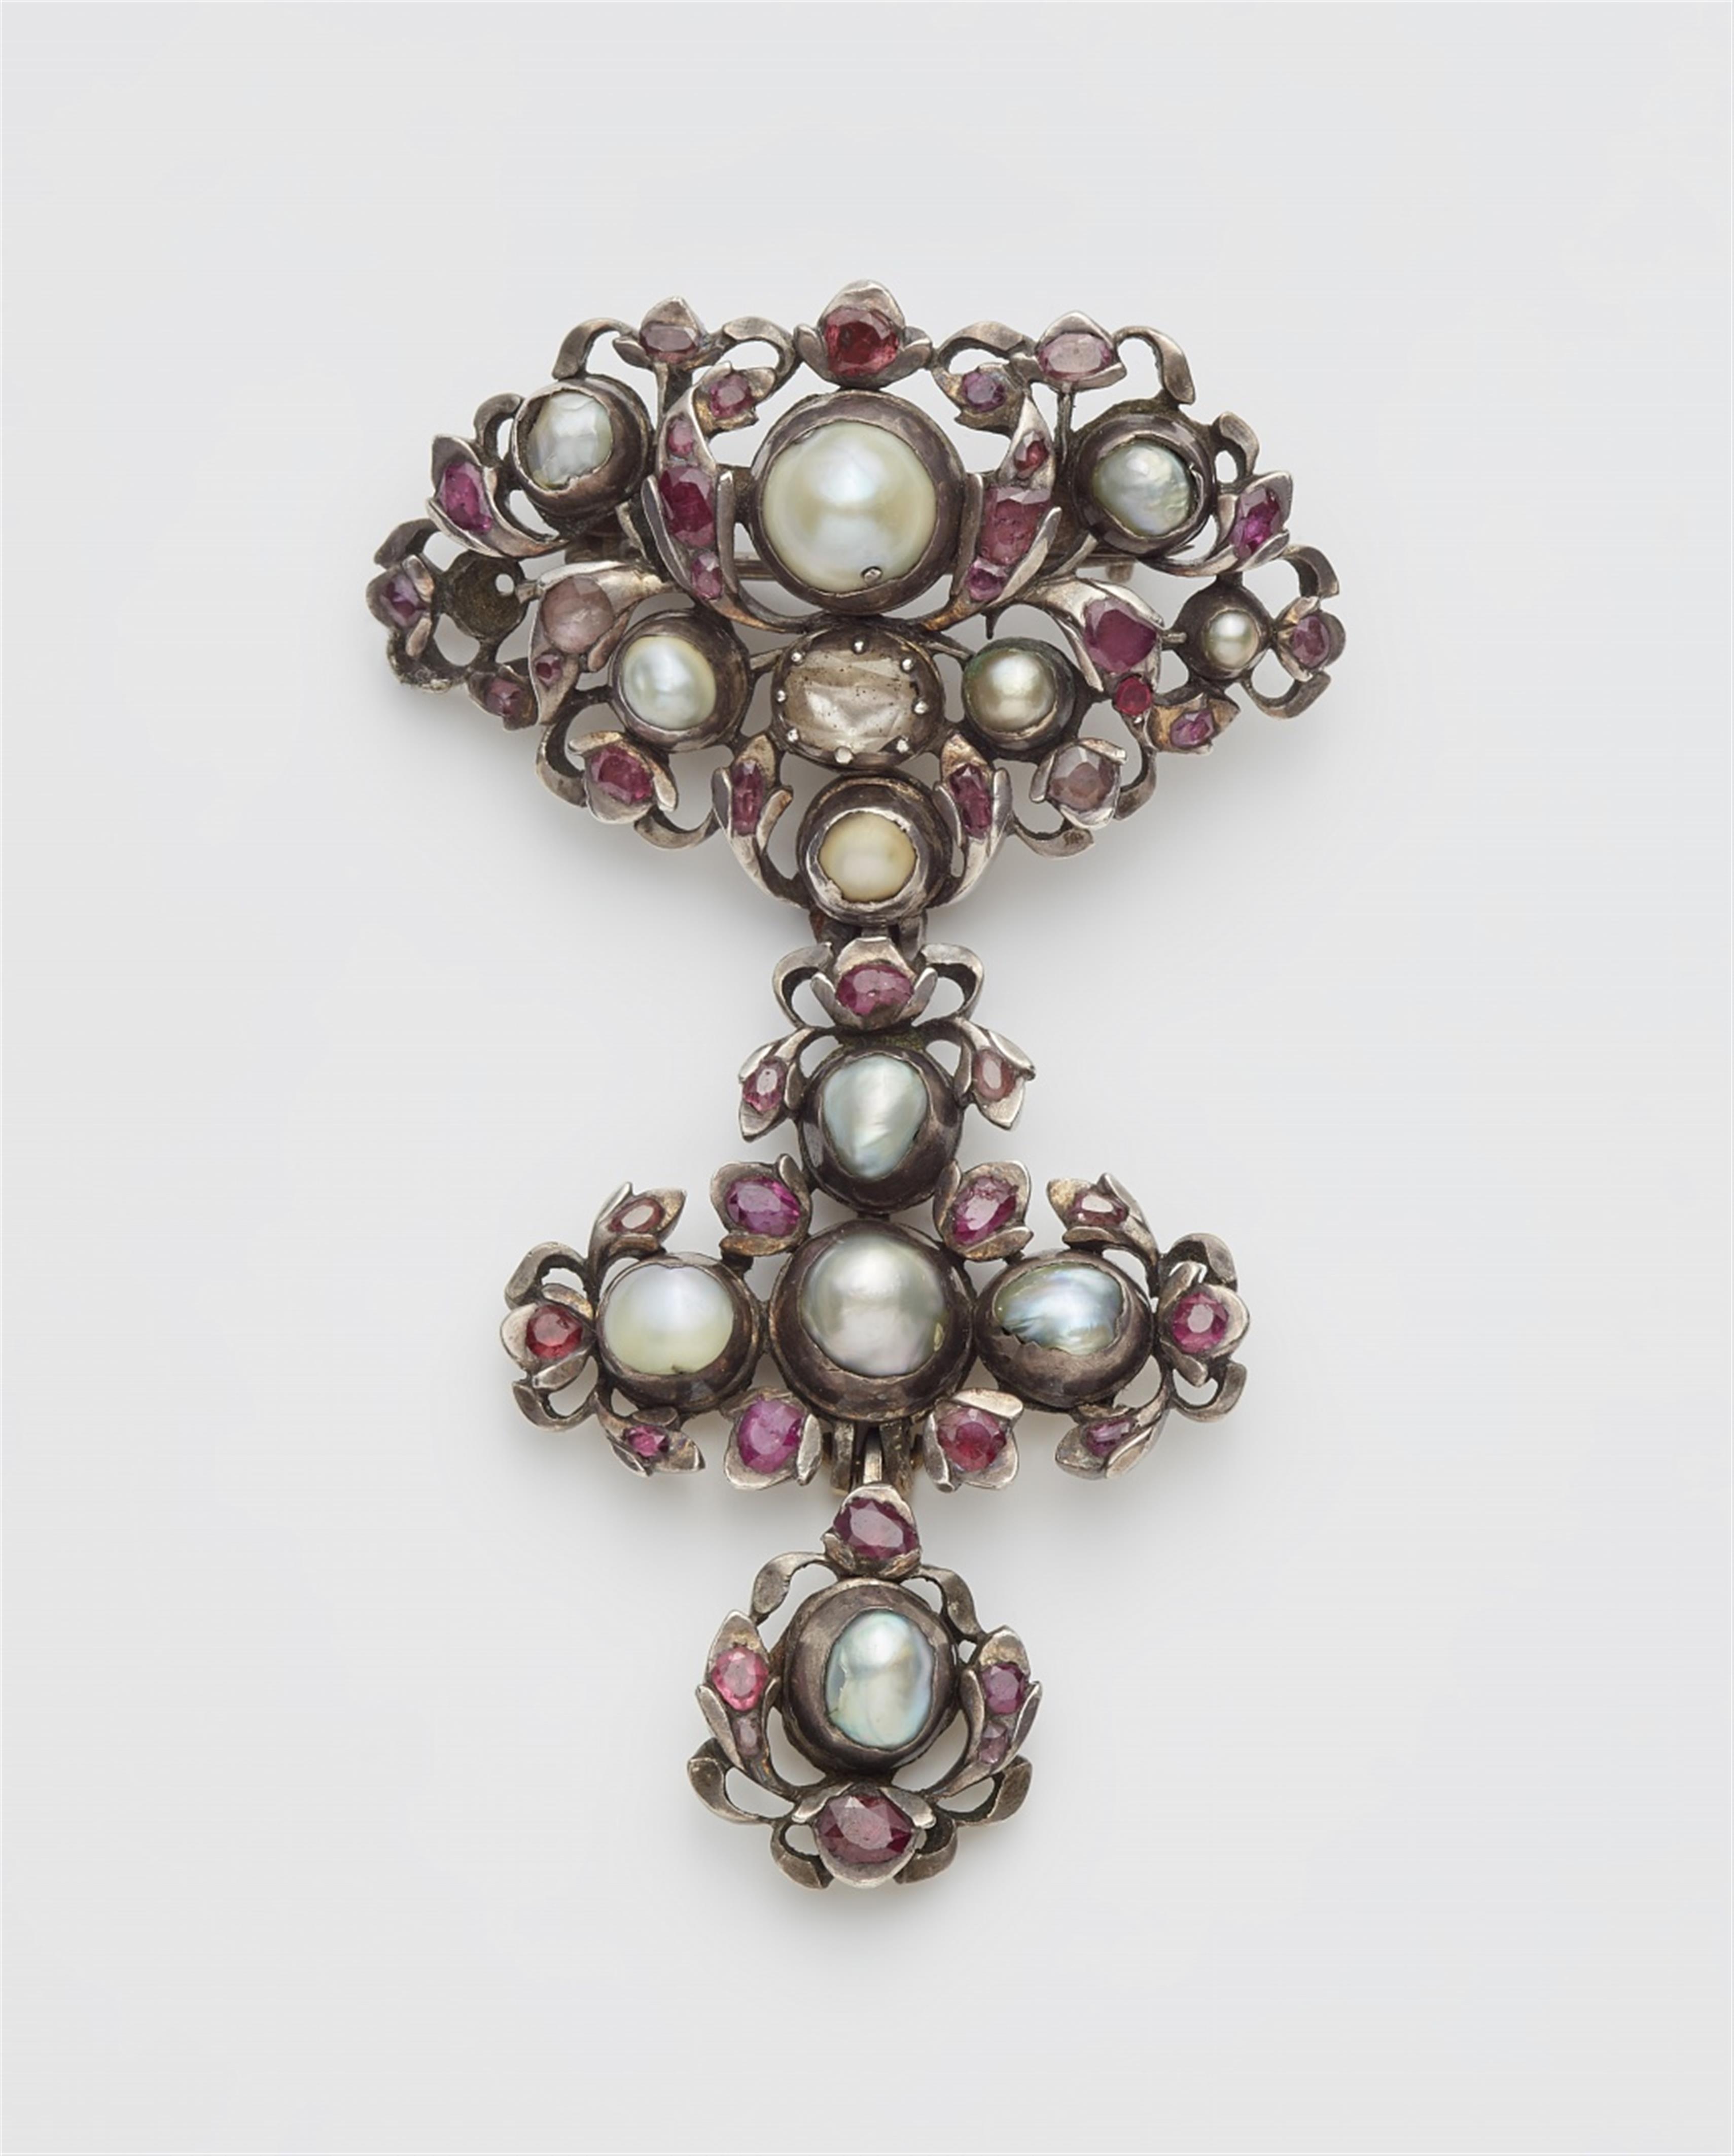 A Baroque brooch with a cross pendant - image-1